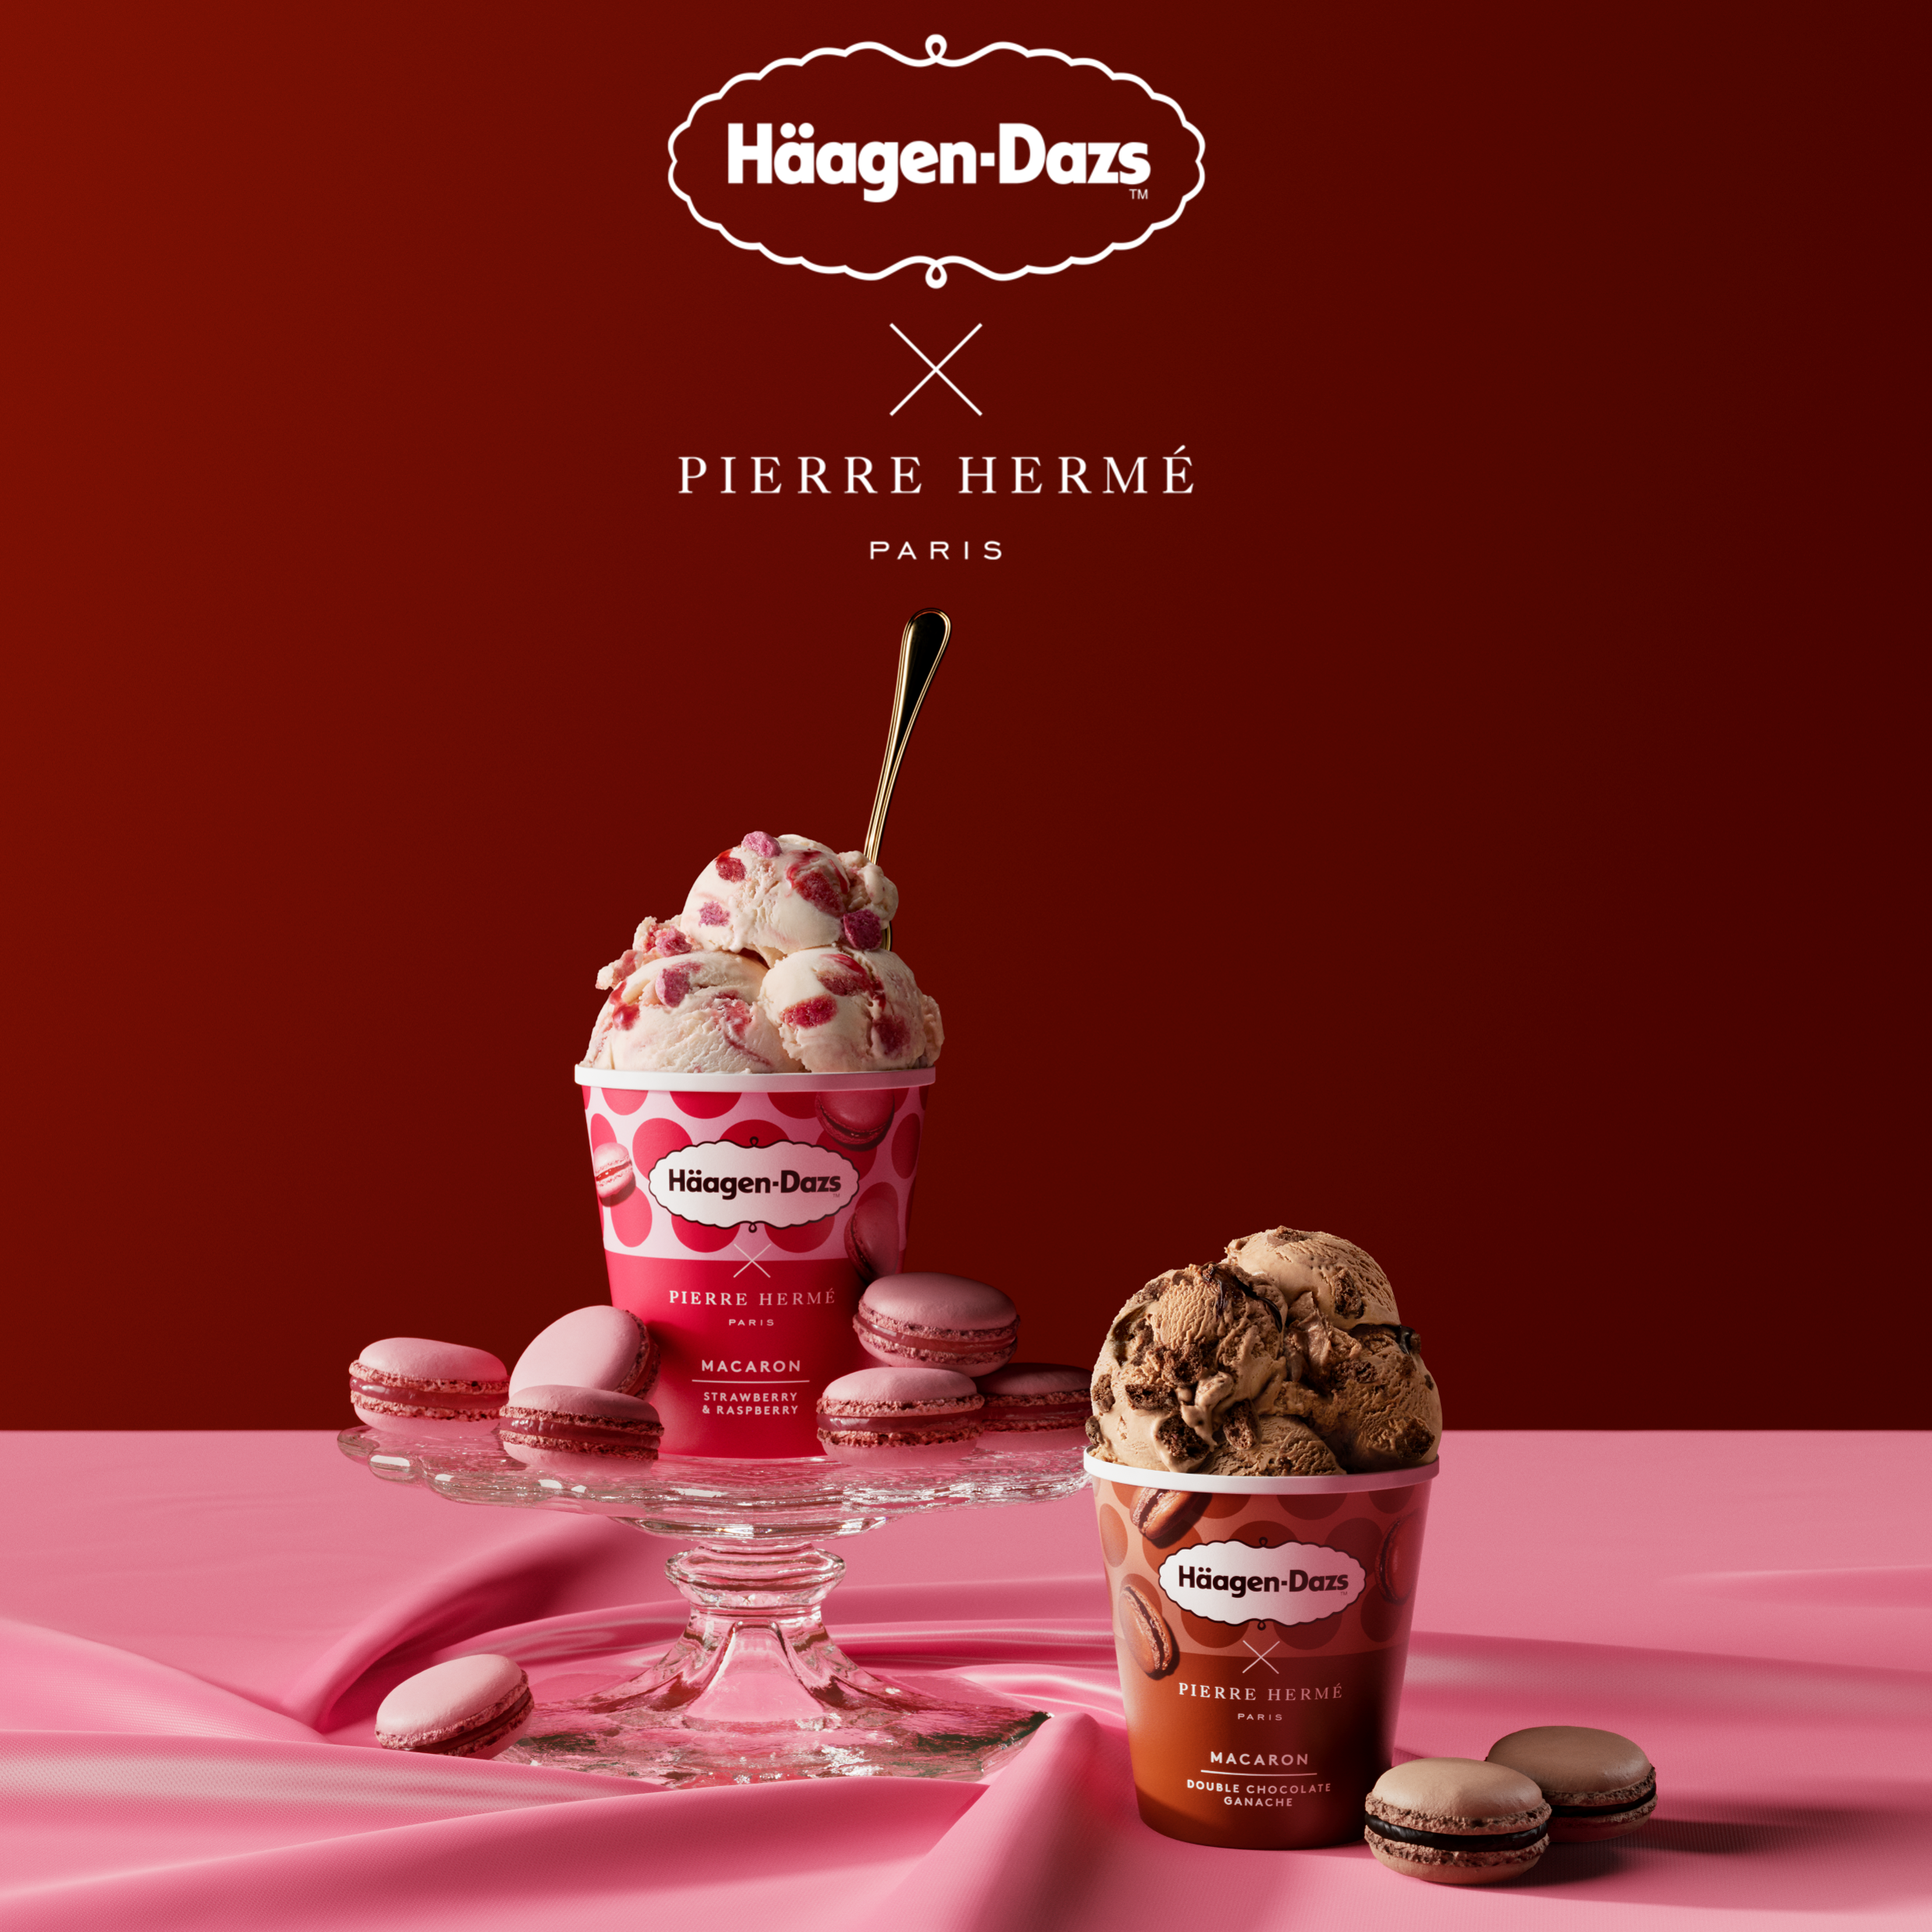 Häagen-Dazs, Pierre Hermé celebrate French flair with new campaign